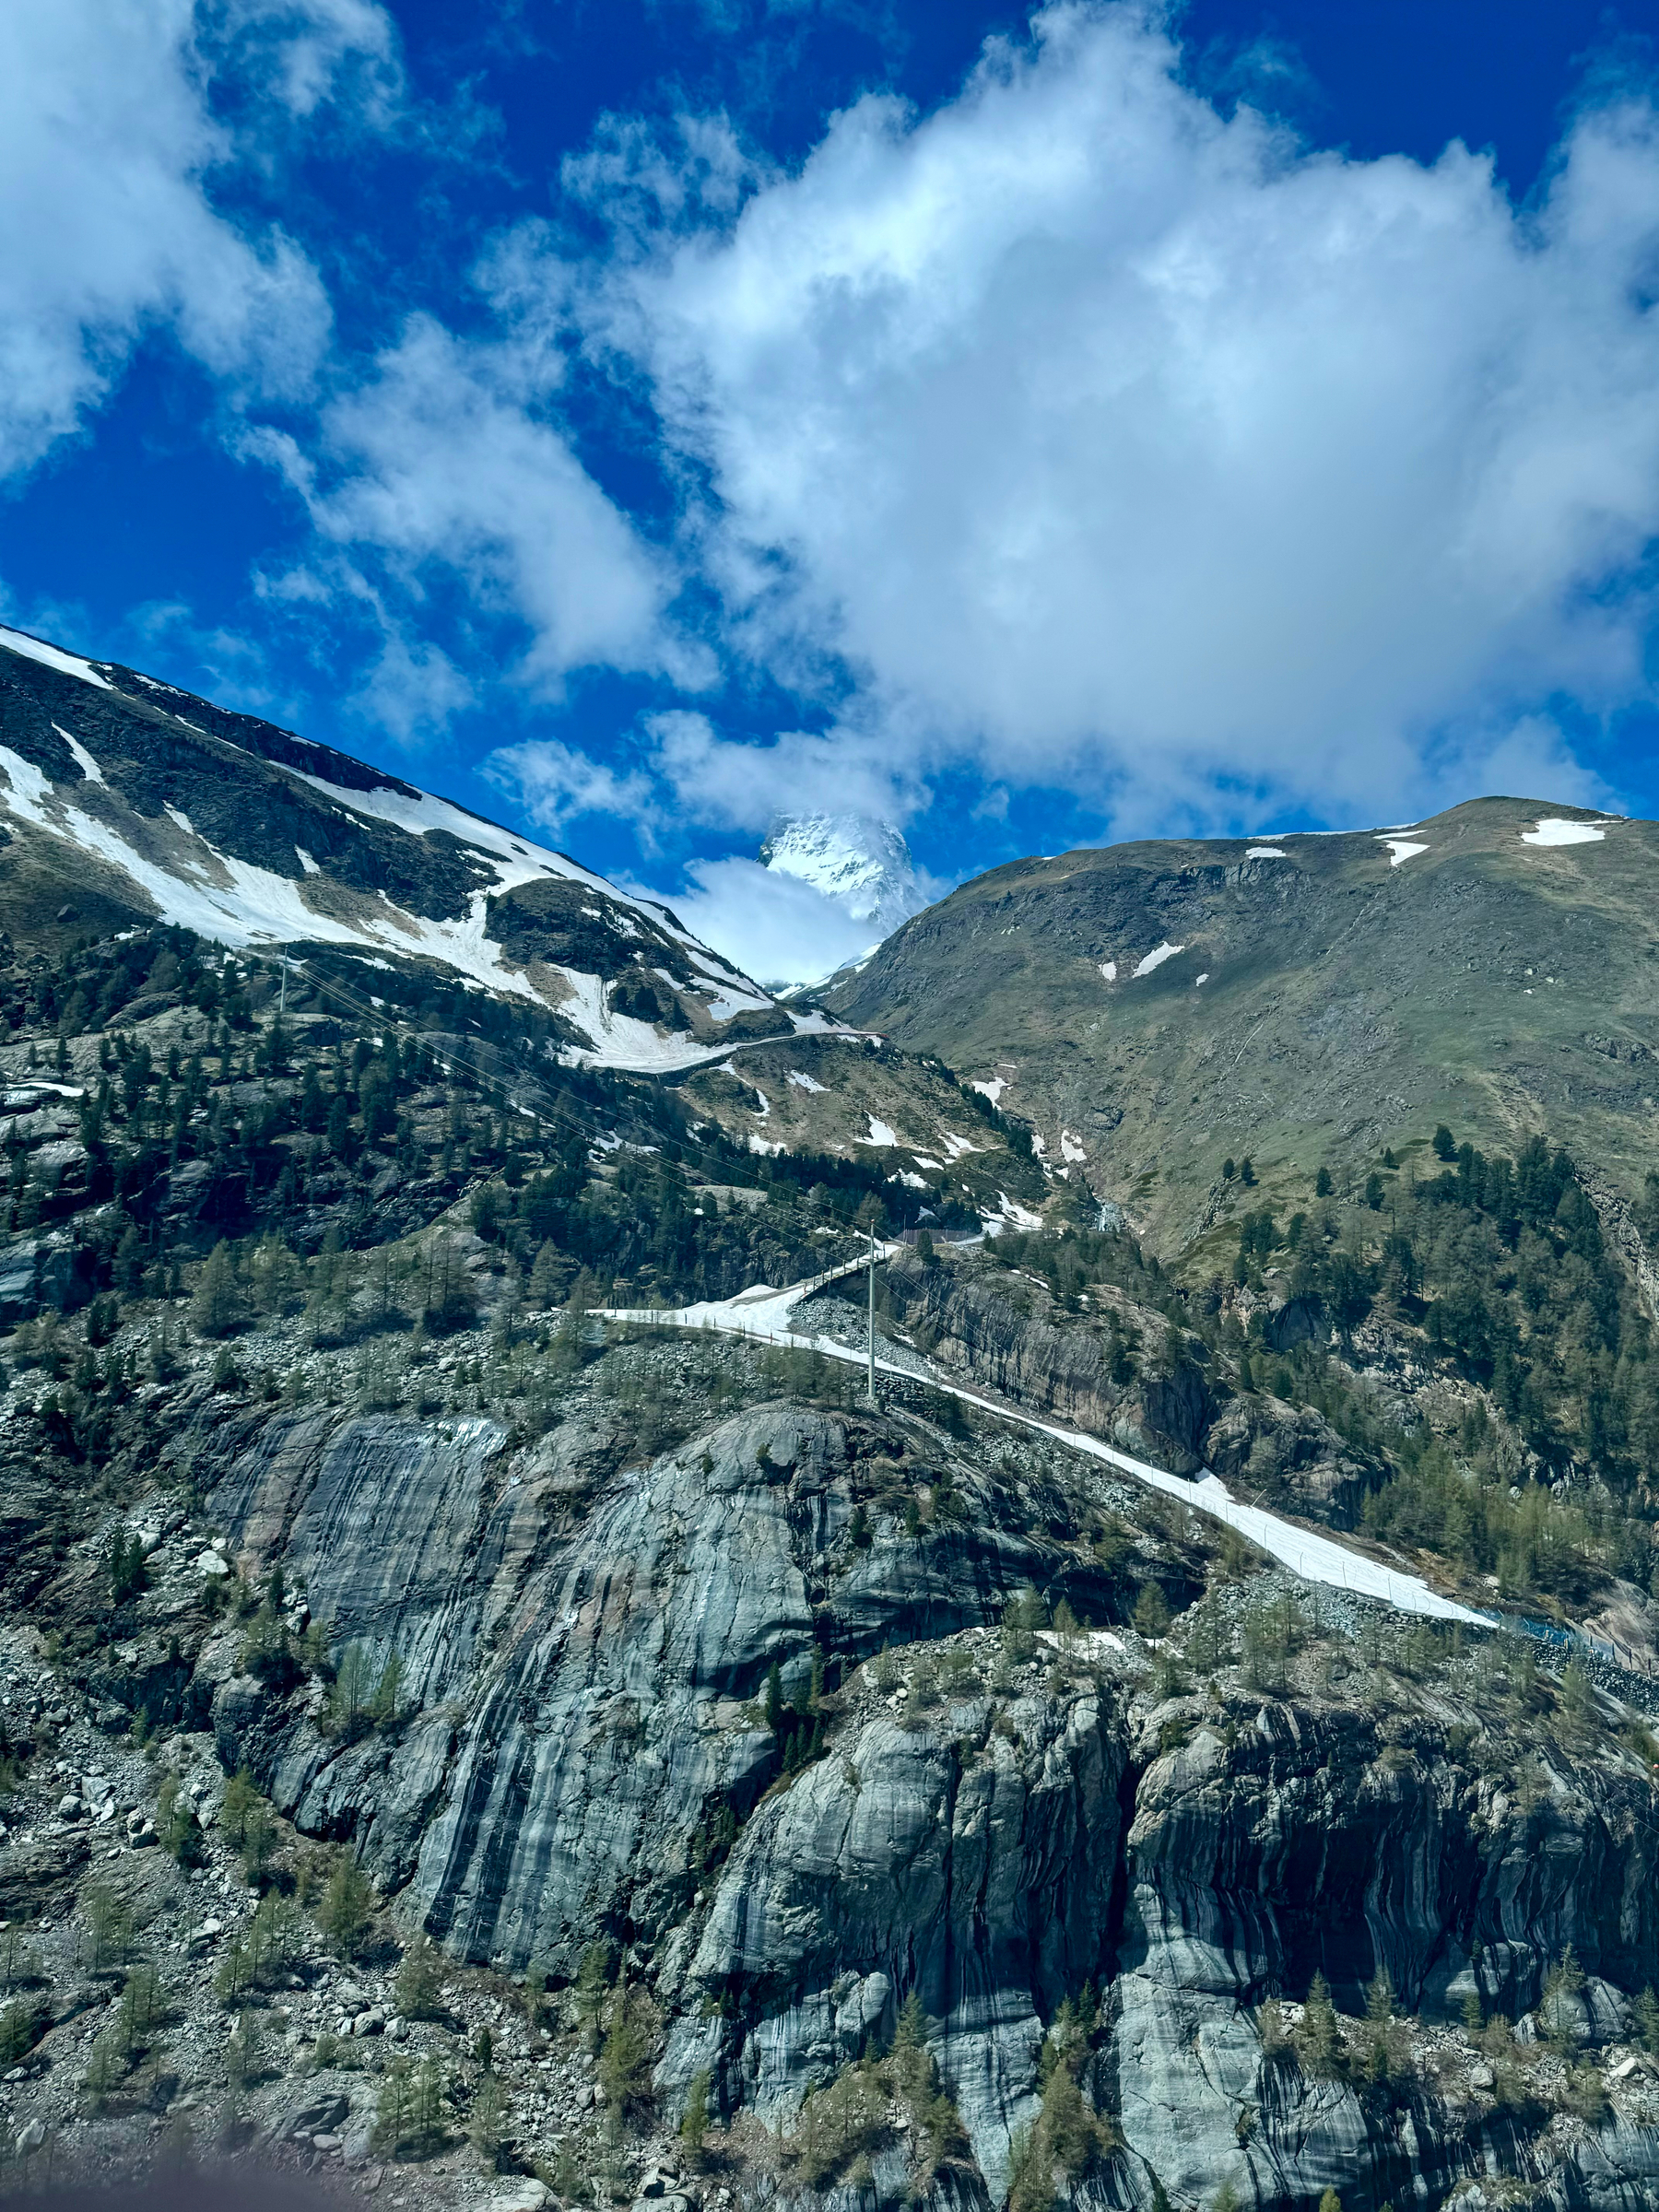 Mountainous landscape with a winding road, snow patches, rocky terrain, and a blue sky with clouds.